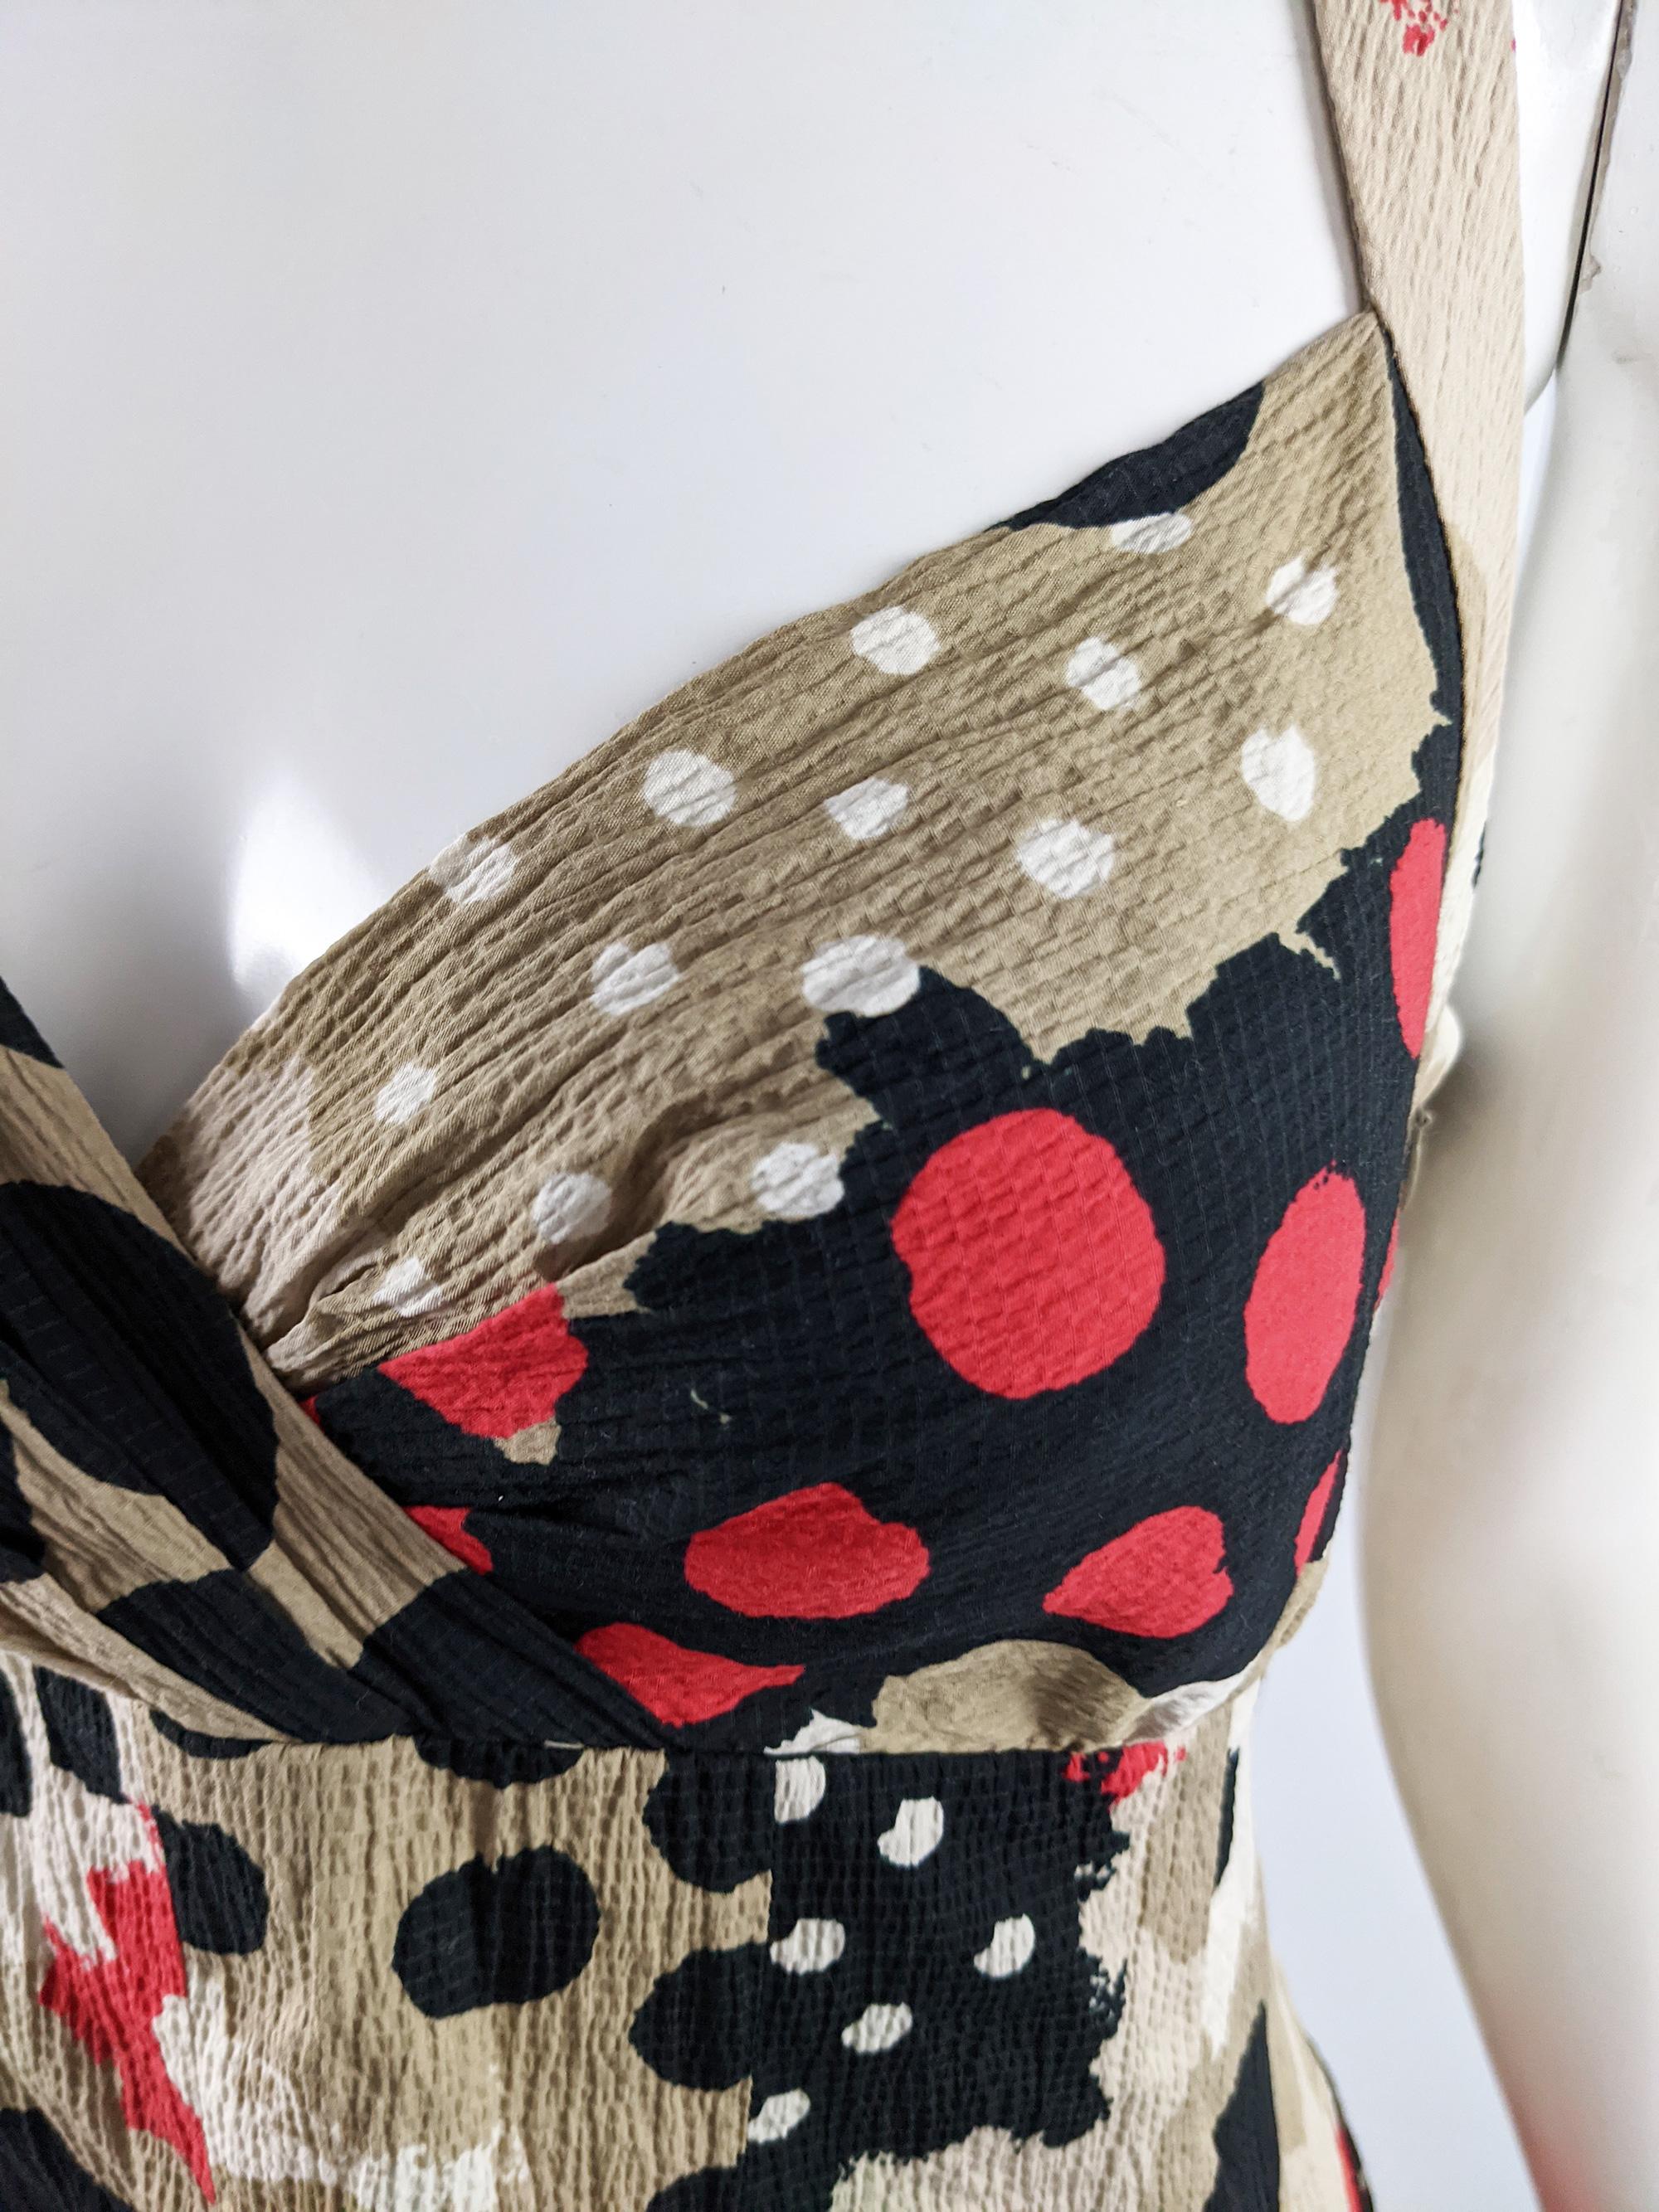 Moschino Vintage Abstract Polka Dot Pattern Halter Neck Party Dress, 2000s In Good Condition For Sale In Doncaster, South Yorkshire